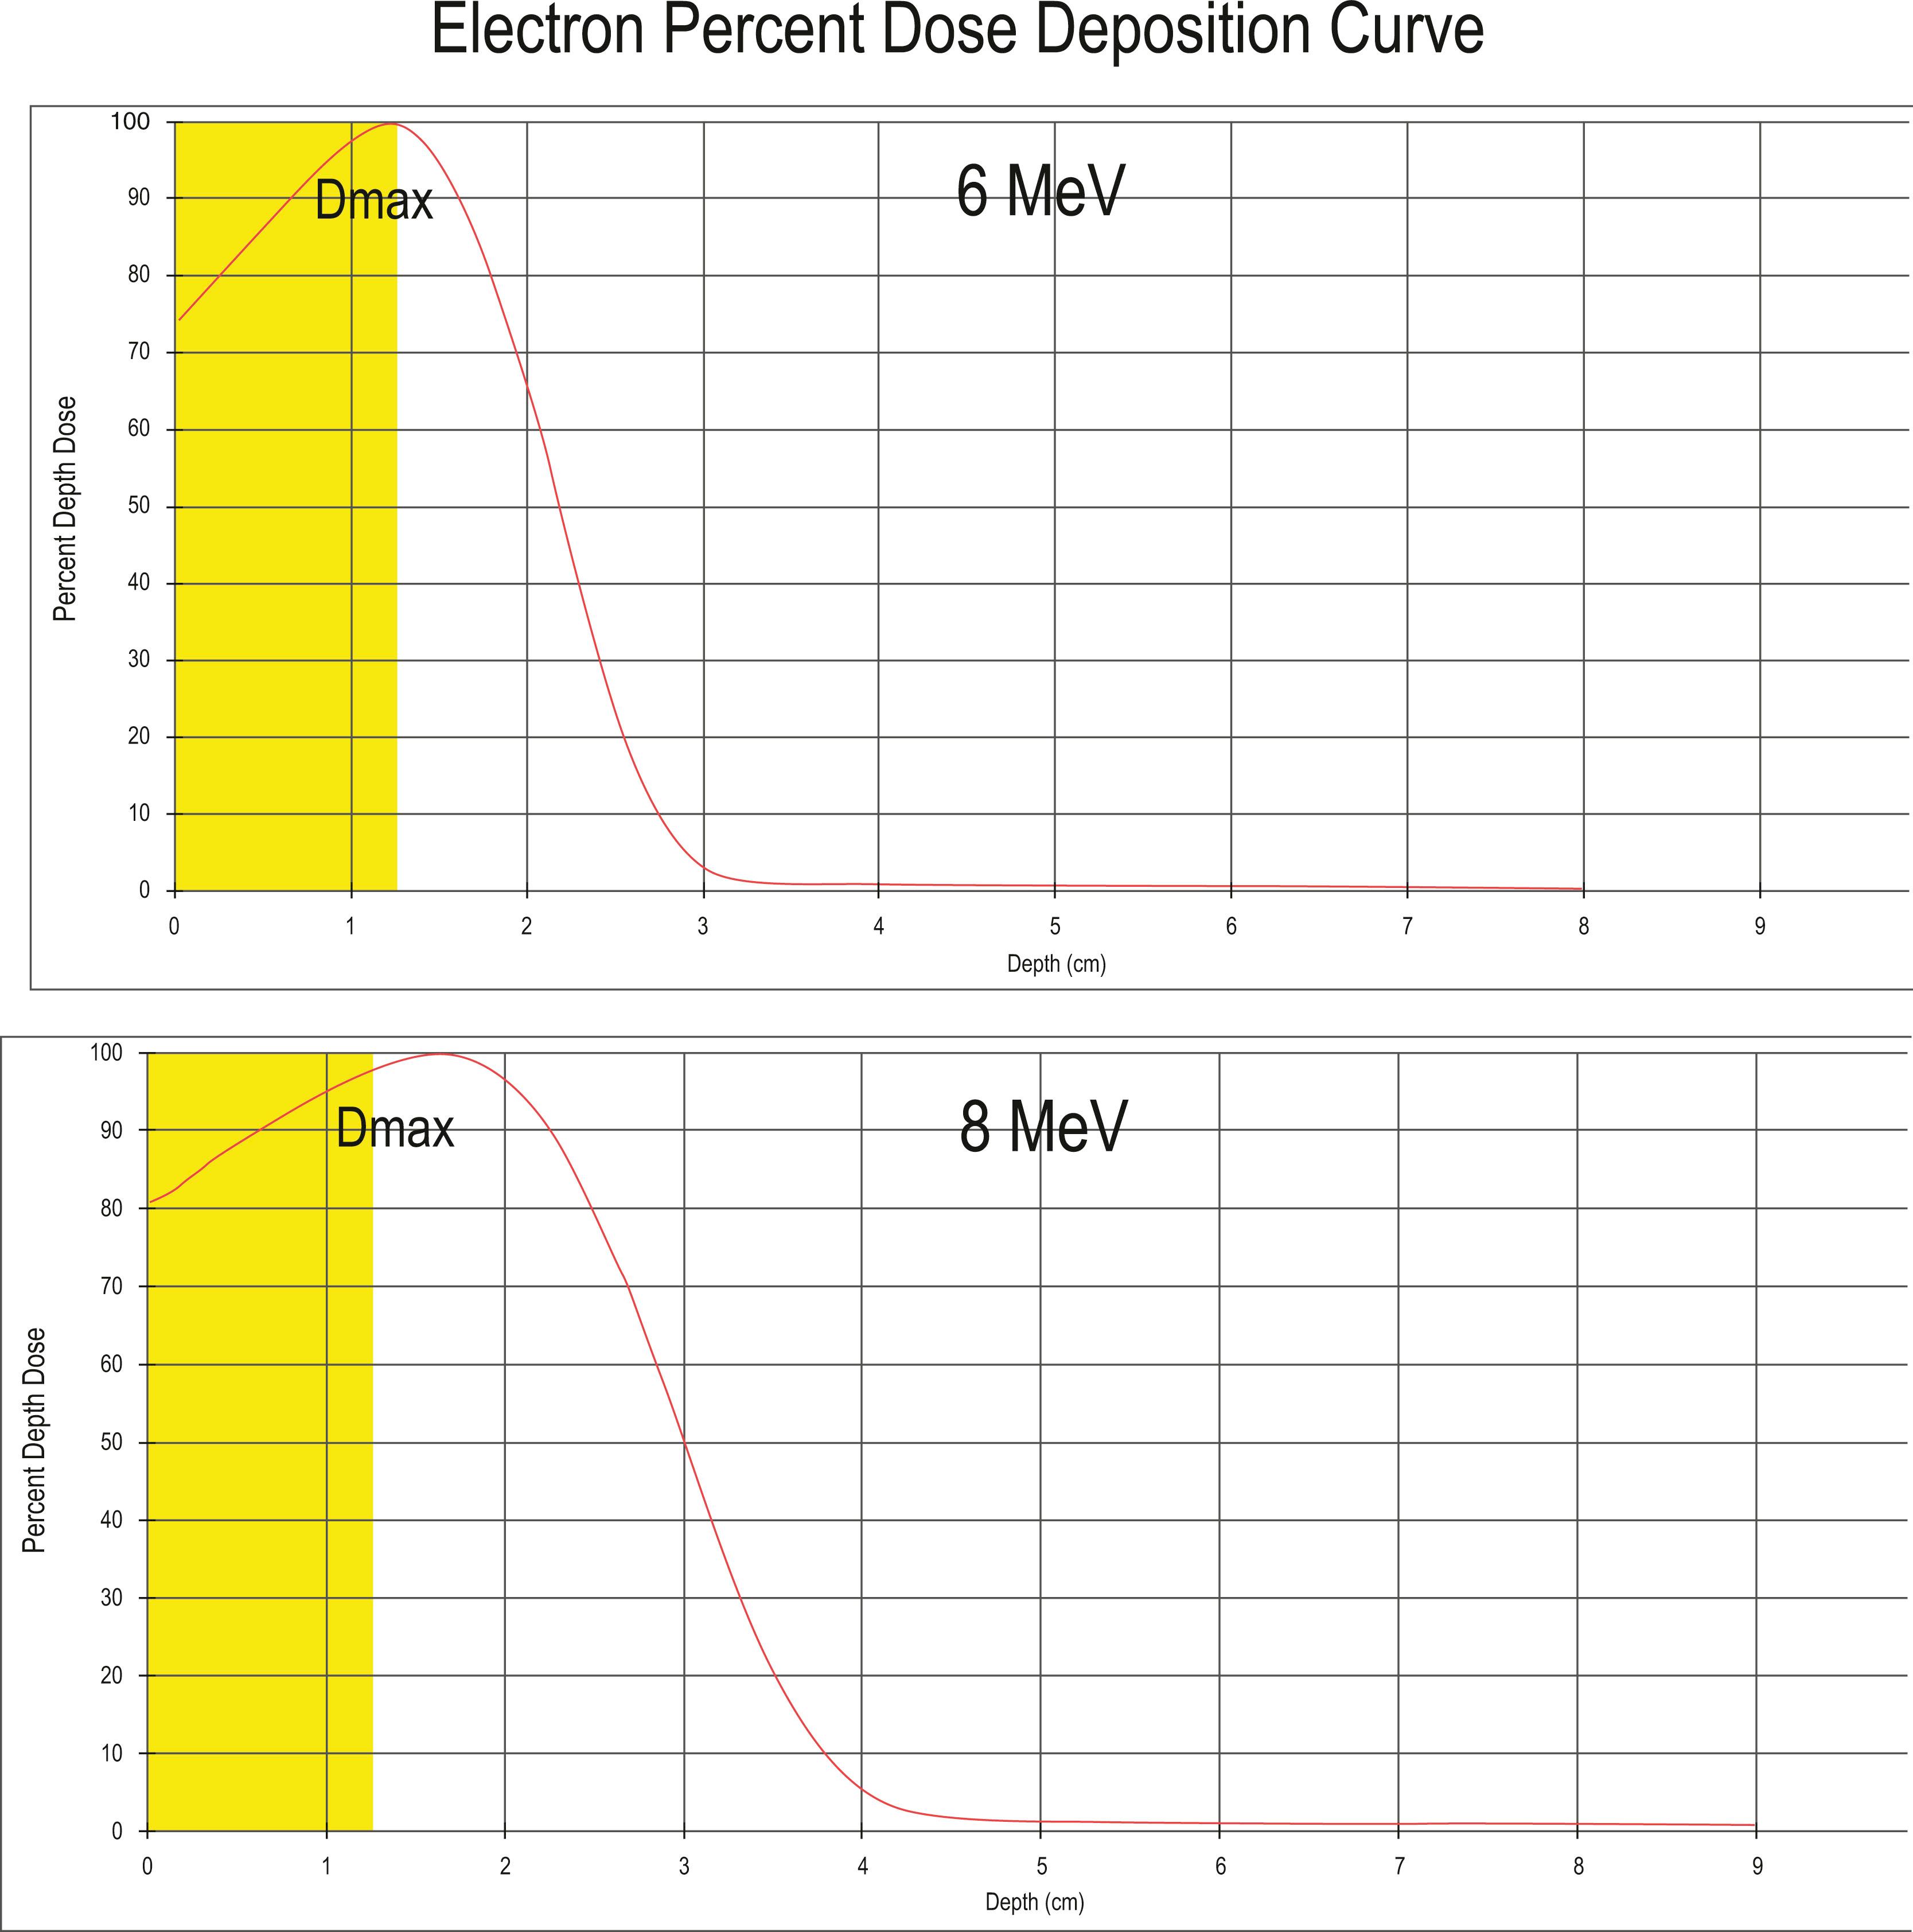 Figure 27.1, Characteristic electron percent dose deposition (PDD) curves. Increasing electron energy (6 MeV to 8 MeV) results in increased depth of the maximum dose deposited ( D max ). Note the skin-sparing effect (shaded yellow box) at the beginning of the curve where bolus (artificial tissue-equivalent material) is required to bring full dose to the skin if required.